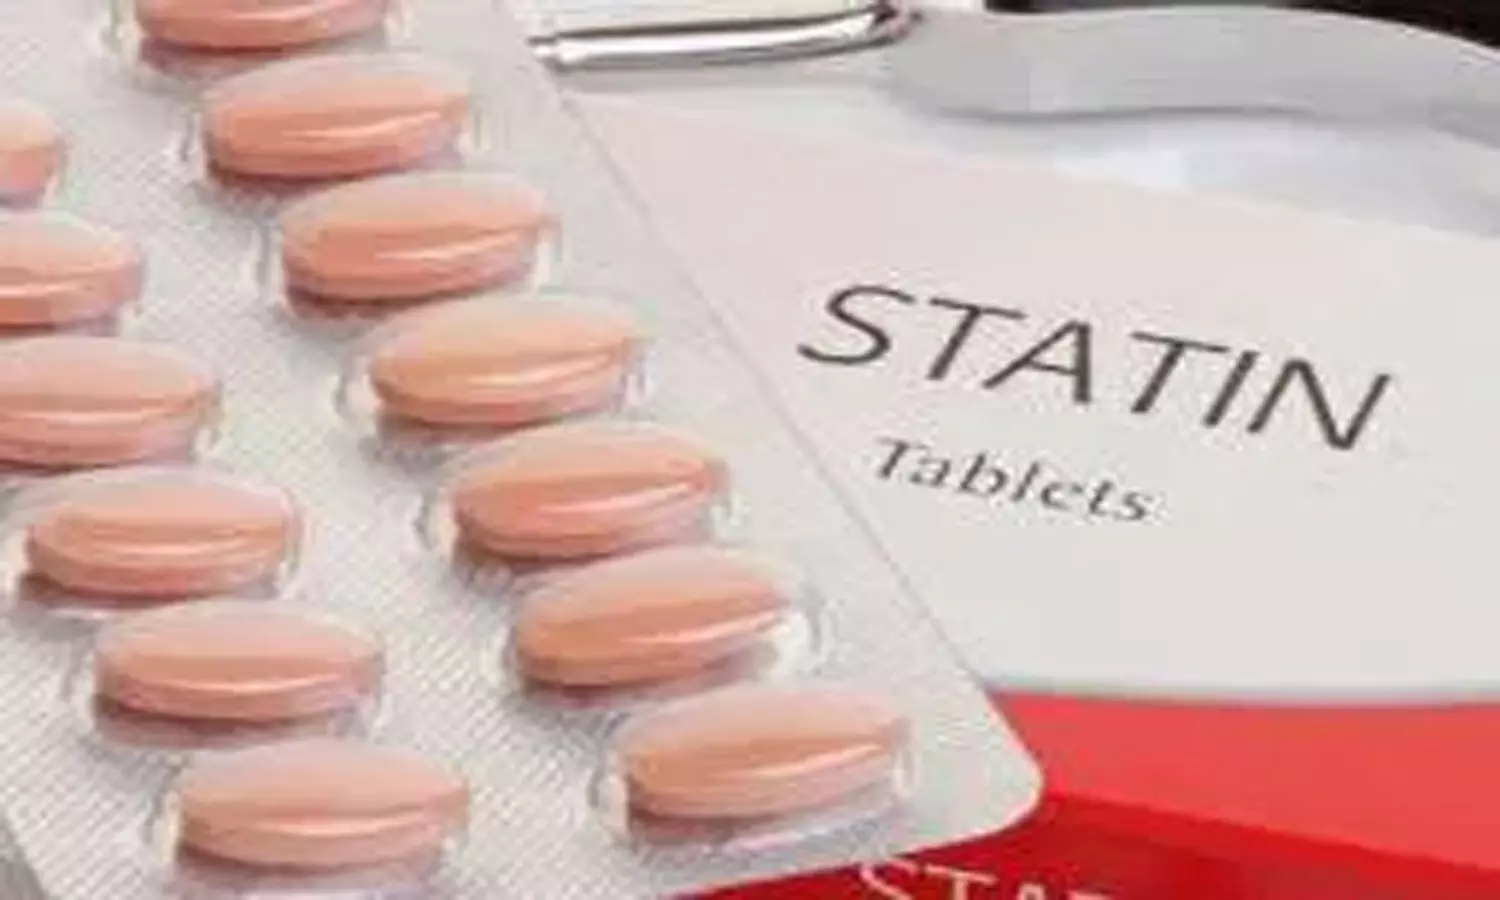 Are statins promising treatment for ovarian cancer? Study throws light